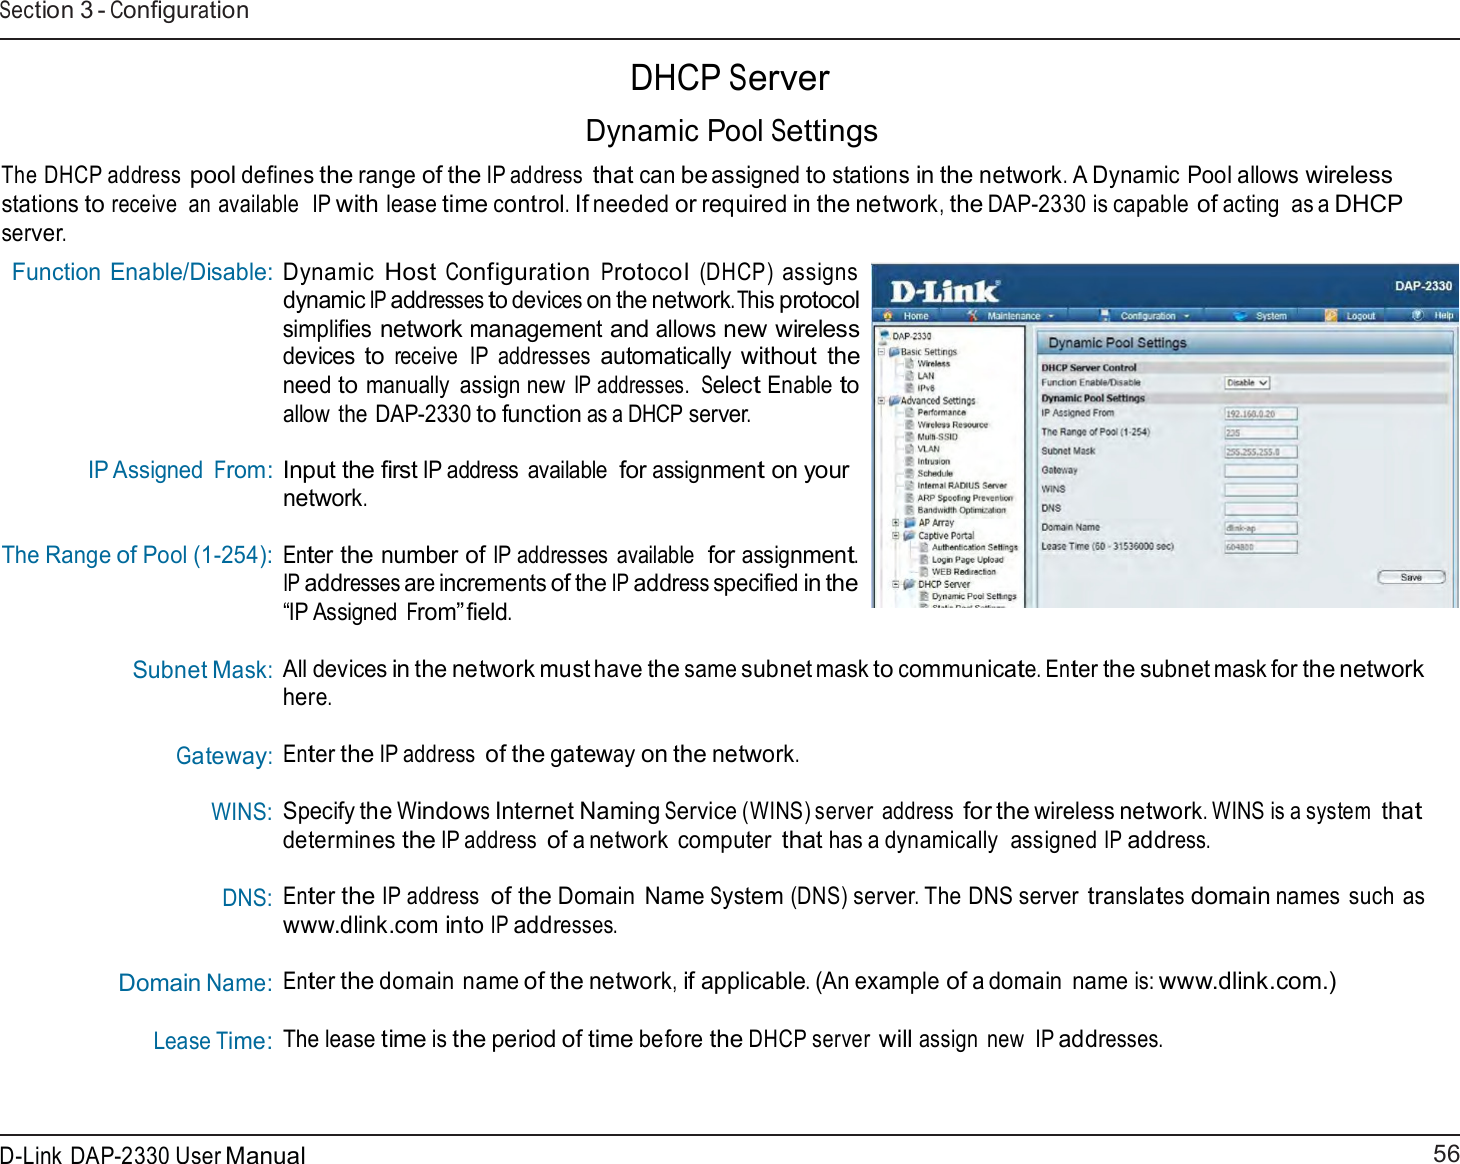 56 D-Link DAP-2330 User ManualSection 3 - Configuration     DHCP Server  Dynamic Pool Settings  The DHCP address pool defines the range of the IP address that can be assigned to stations in the network. A Dynamic Pool allows wireless stations to receive  an available  IP with lease time control. If needed or required in the network, the DAP-2330 is capable of acting  as a DHCP server. Function Enable/Disable:         IP Assigned From: The Range of Pool (1-254):  Subnet Mask:    Gateway: WINS:  DNS:    Domain Name: Lease Time: Dynamic Host Configuration Protocol (DHCP) assigns dynamic IP addresses to devices on the network.This protocol simplifies network management and allows new wireless devices to receive  IP  addresses automatically without  the need to manually  assign new IP addresses.  Select Enable to allow  the DAP-2330 to function as a DHCP server.  Input the first IP address  available for assignment on your network.  Enter the number of IP addresses available  for assignment. IP addresses are increments of the IP address specified in the “IP Assigned From” field.  All devices in the network must have the same subnet mask to communicate. Enter the subnet mask for the network here.  Enter the IP address of the gateway on the network.  Specify the Windows Internet Naming Service (WINS) server  address for the wireless network. WINS is a system that determines the IP address of a network  computer that has a dynamically  assigned IP address.  Enter the IP address of the Domain  Name System (DNS) server. The DNS server translates domain names such as www.dlink.com into IP addresses.  Enter the domain name of the network, if applicable. (An example of a domain  name is: www.dlink.com.) The lease time is the period of time before the DHCP server will assign  new  IP addresses. 